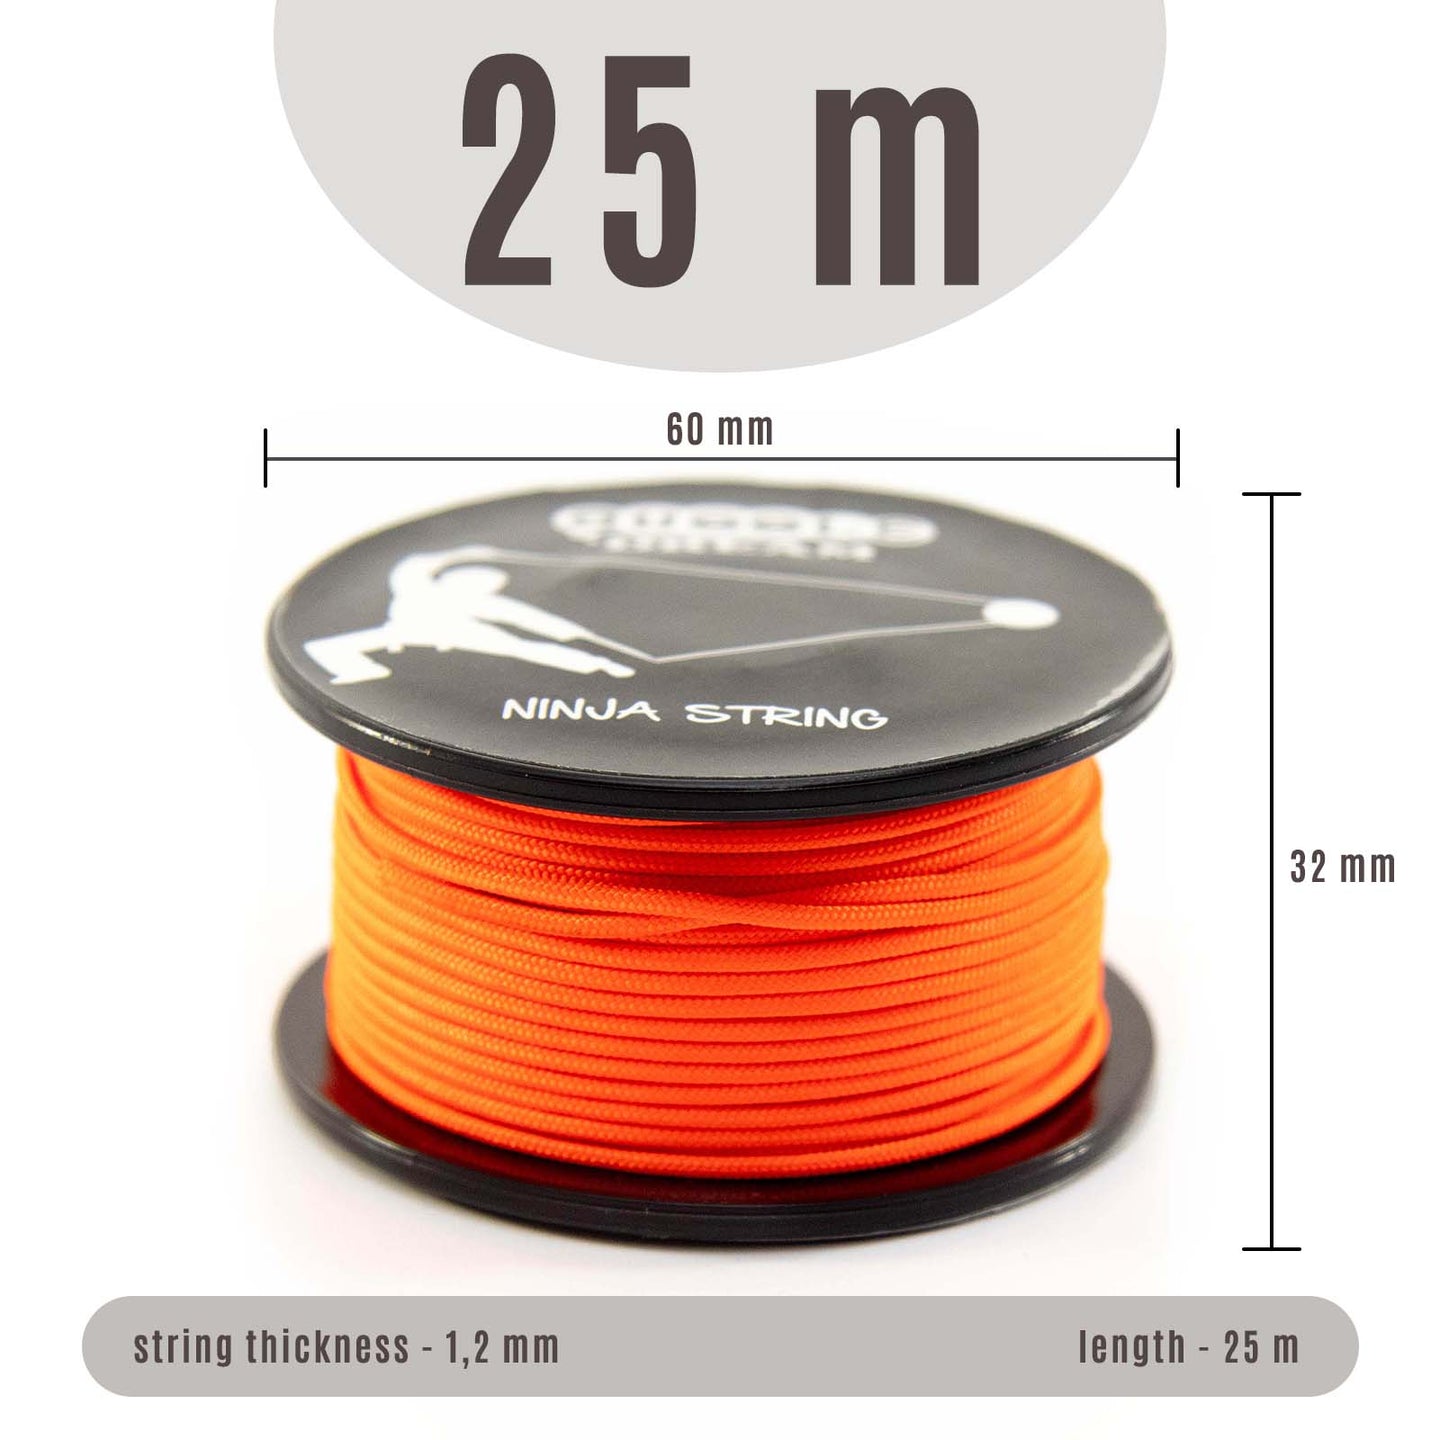 Diabolo String specifications